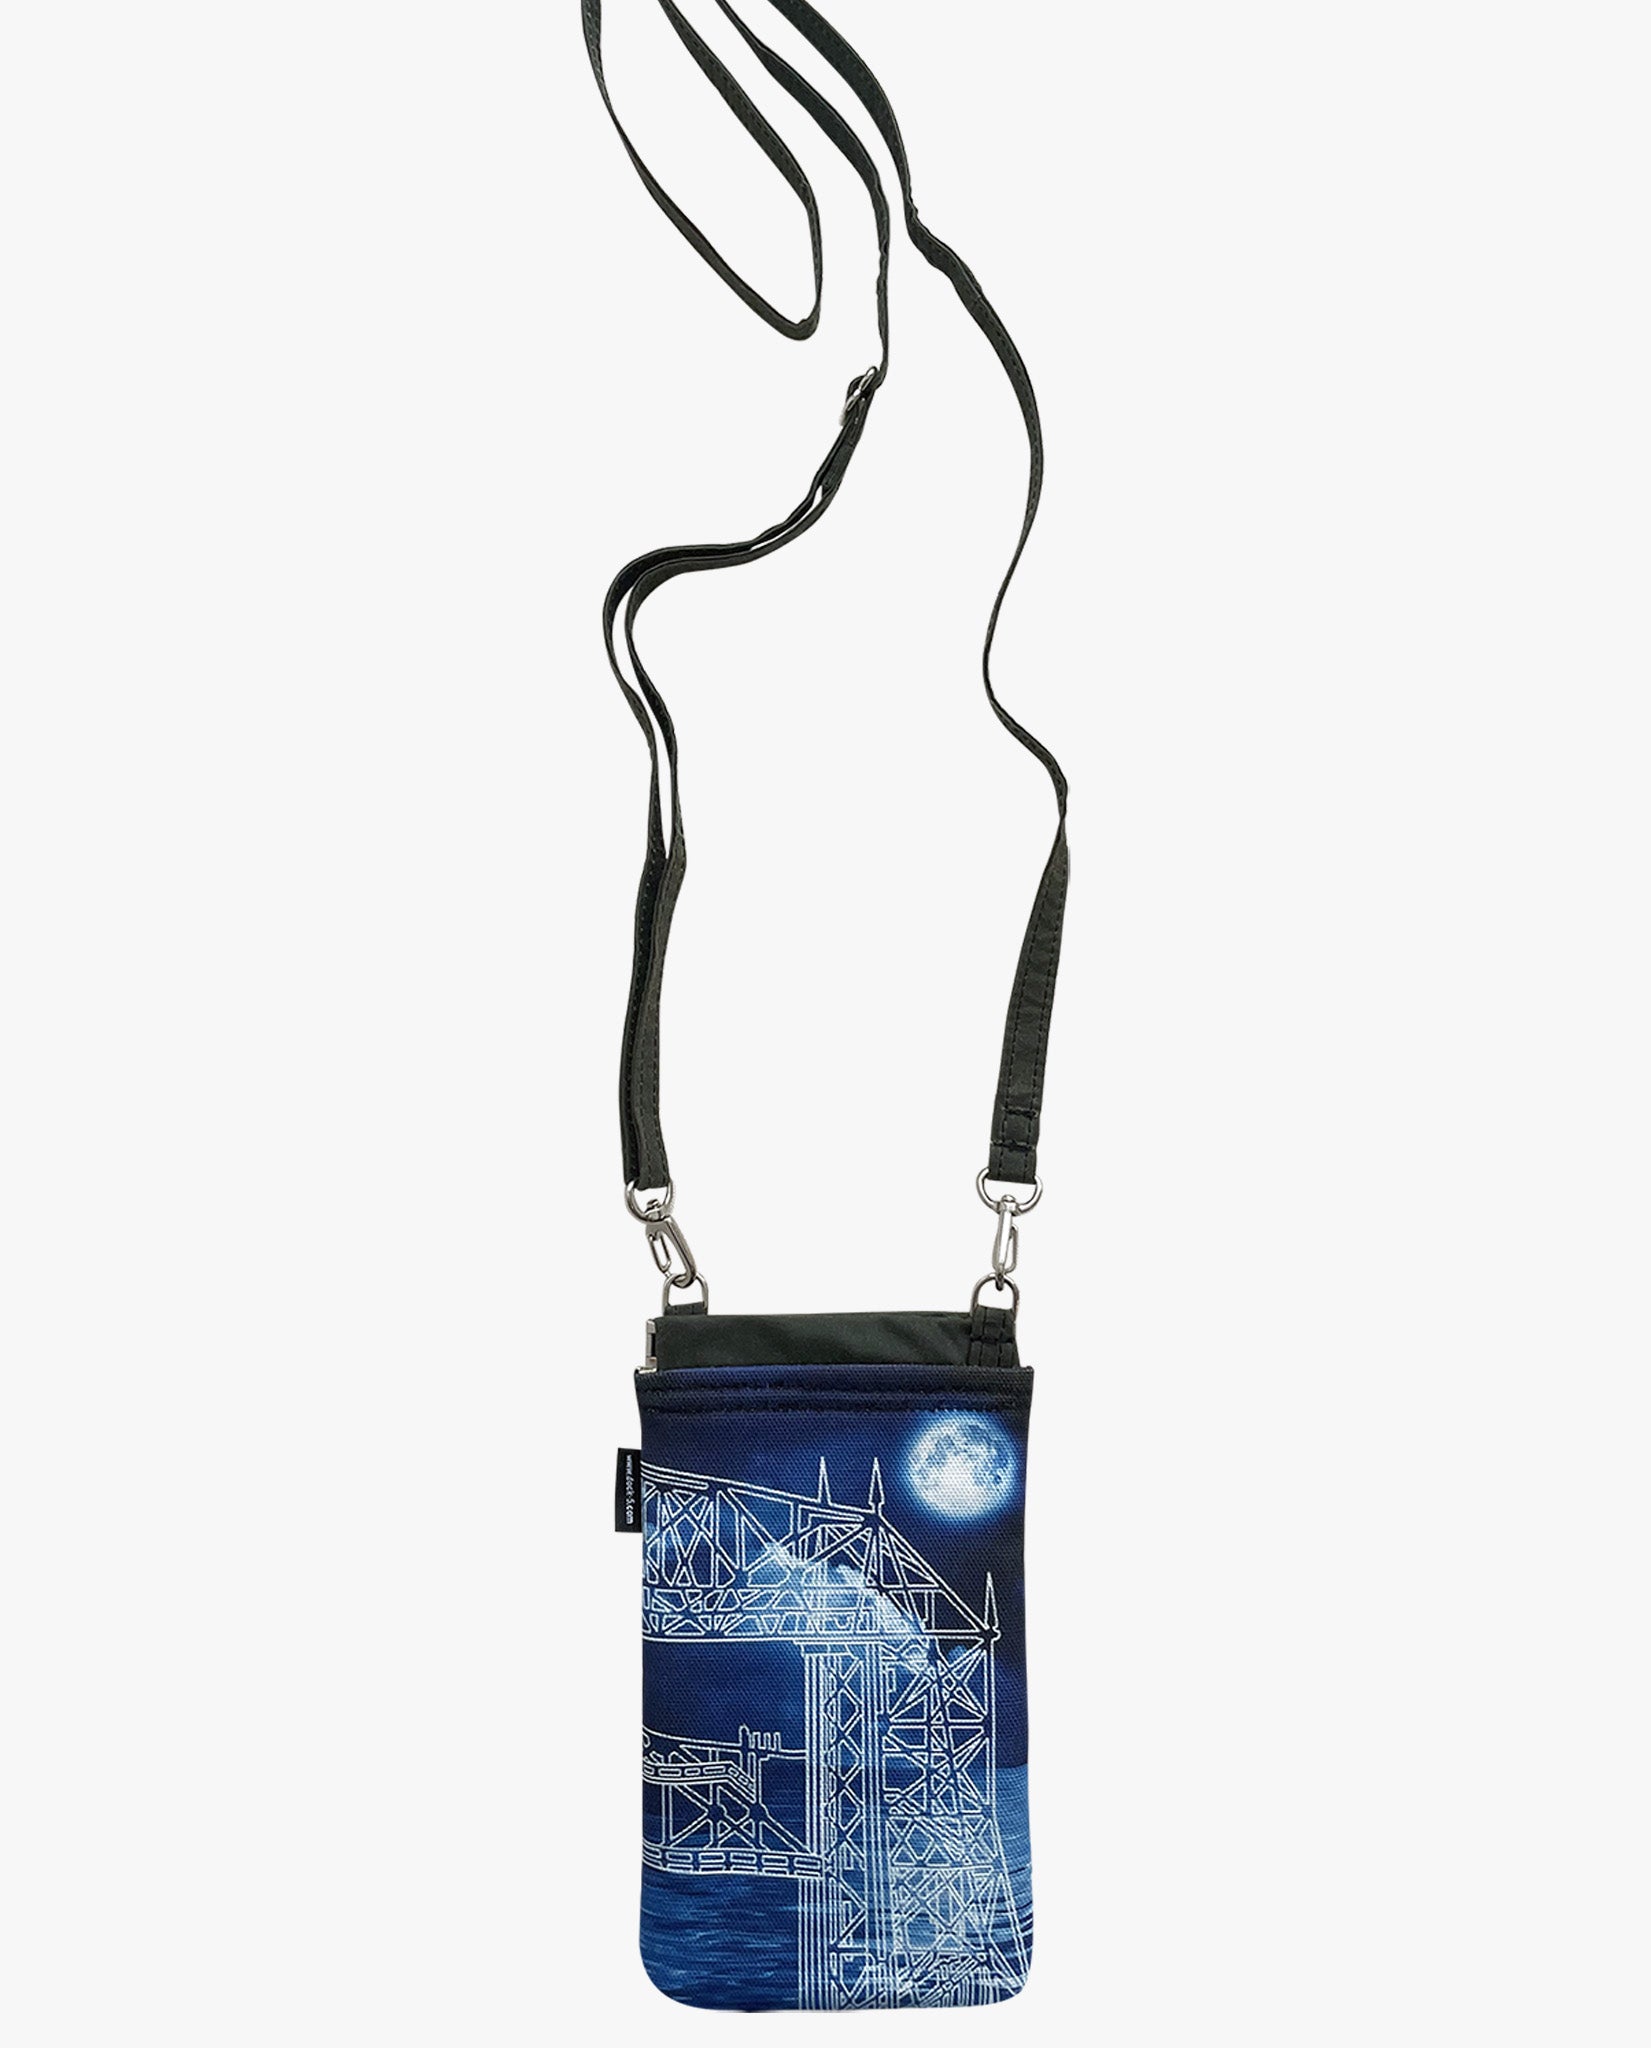 Lift Bridge cell phone bag with adjustable strap by Dock 5 Duluth